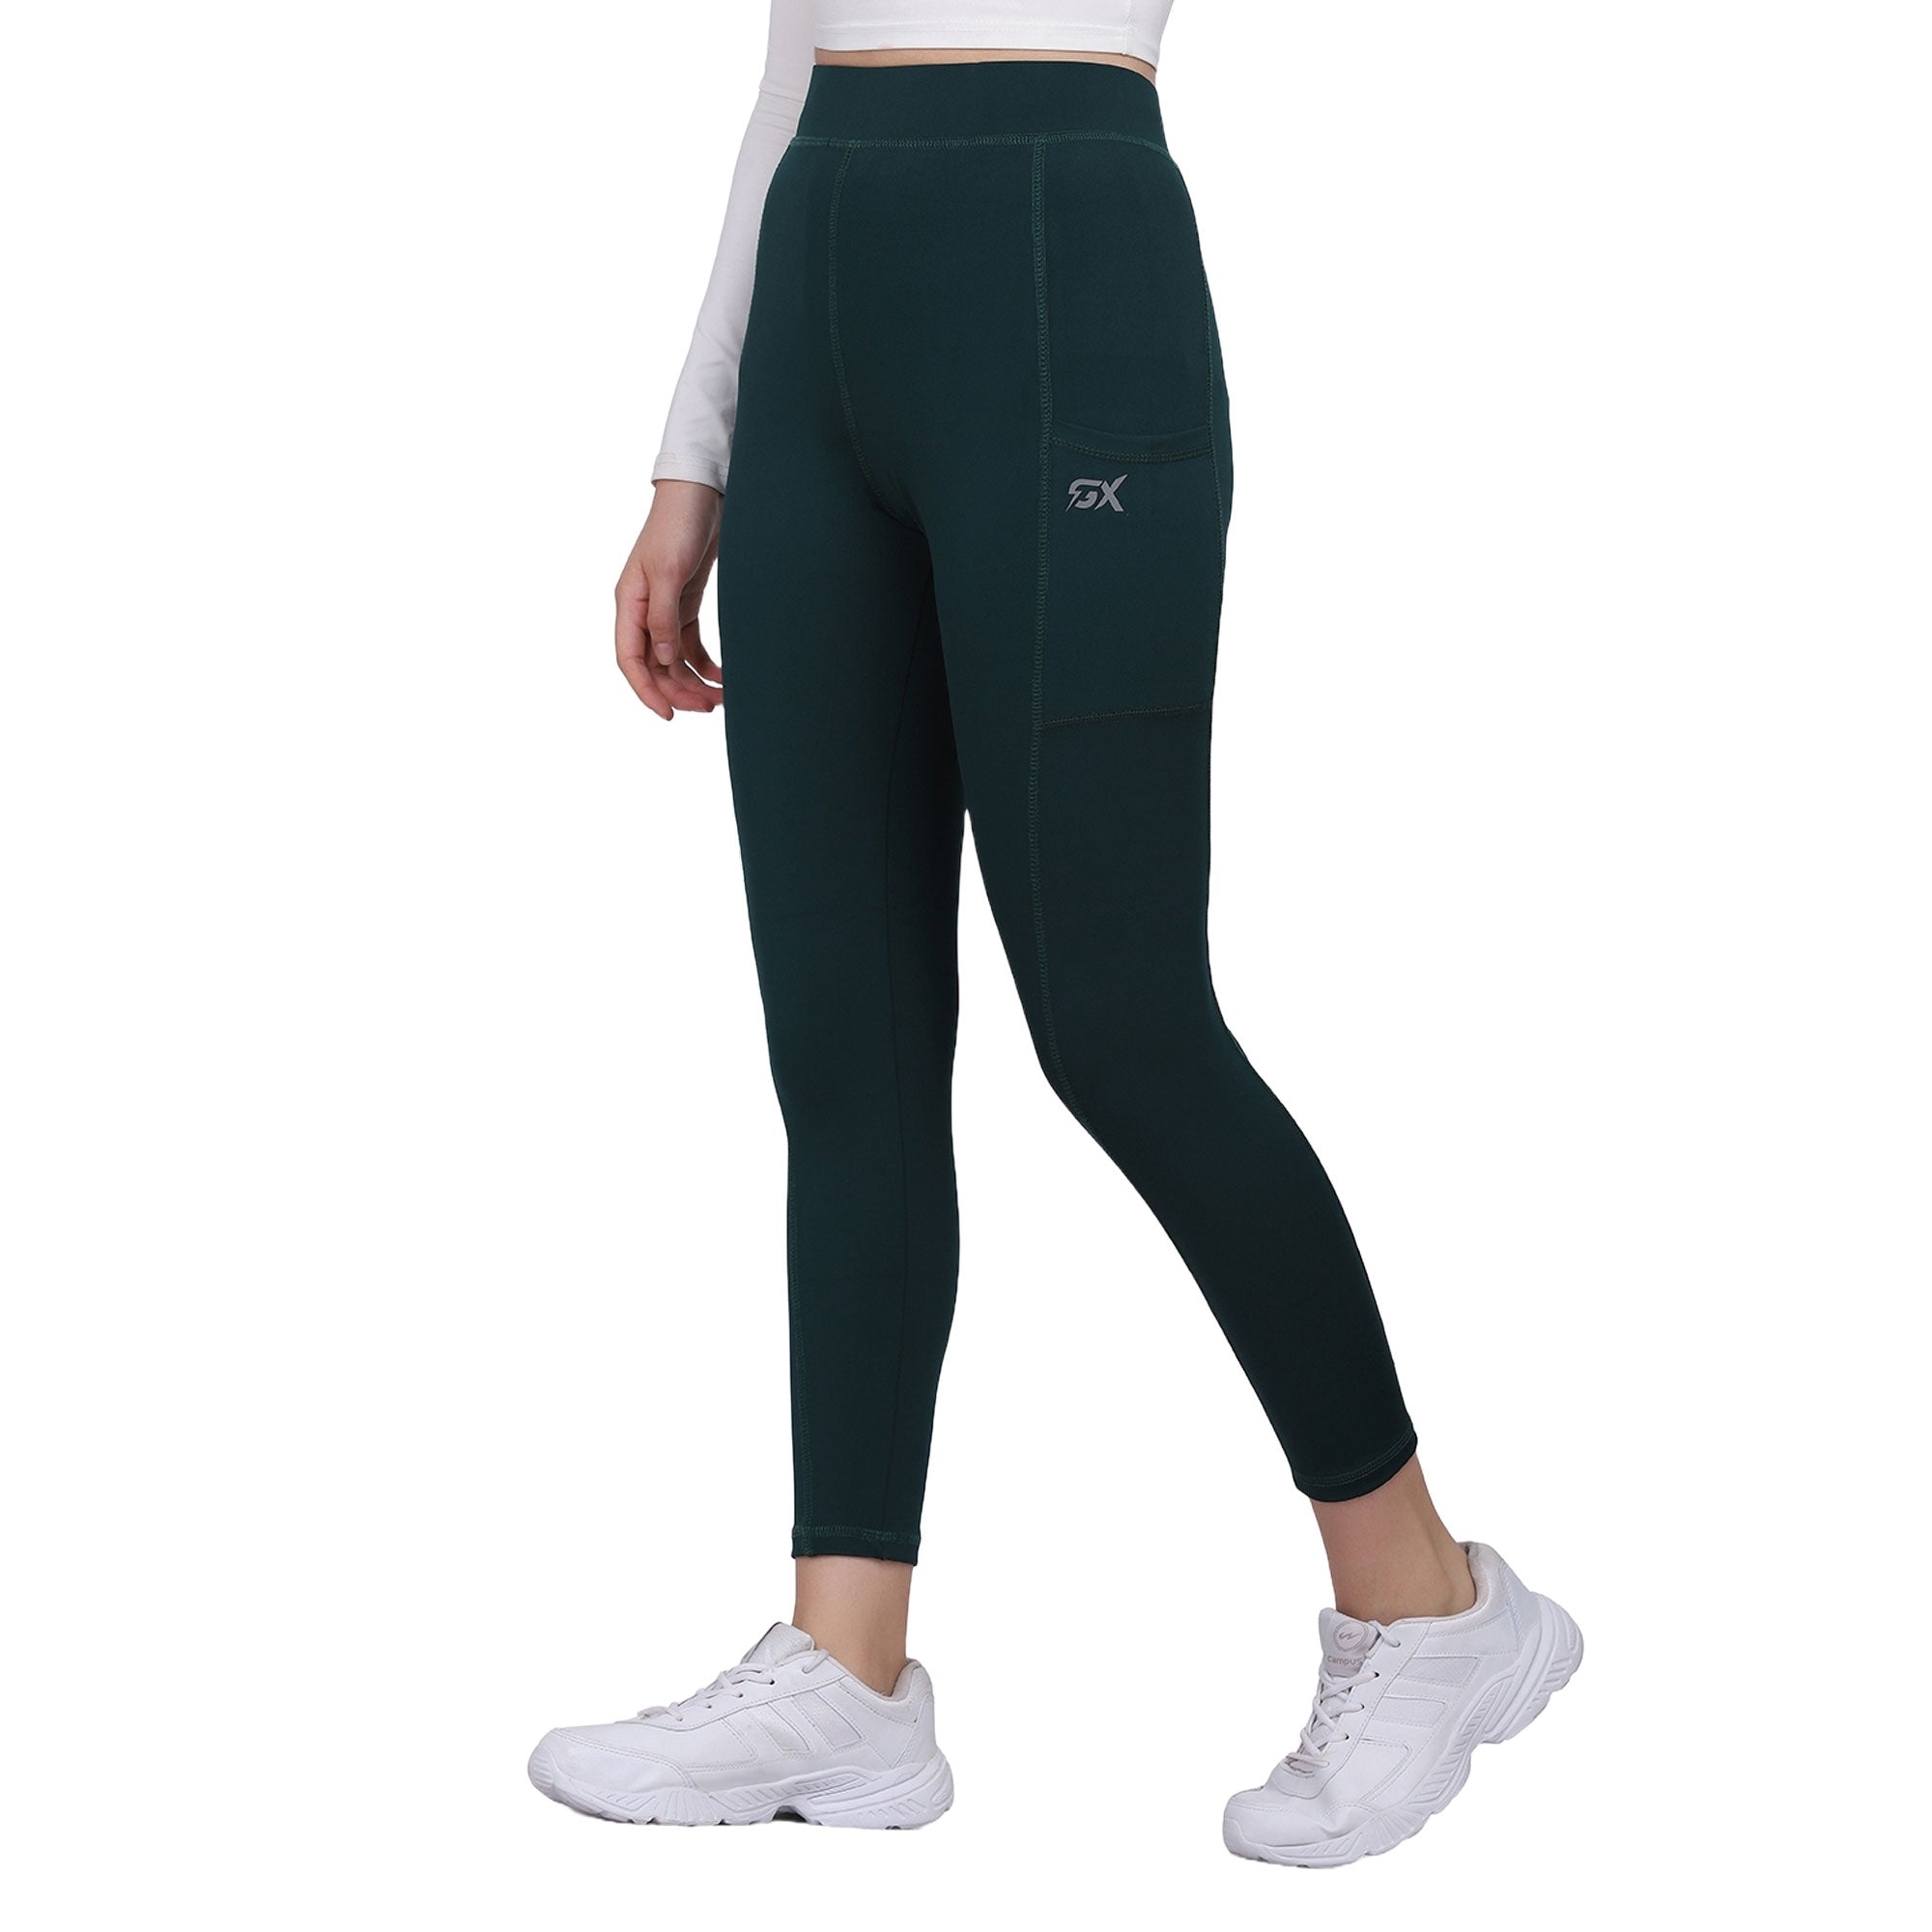 Wholesale MKS Impex Cotton Lycra Ankle Length Leggings For Women & Girls ( Green) with best liquidation deal | Excess2sell